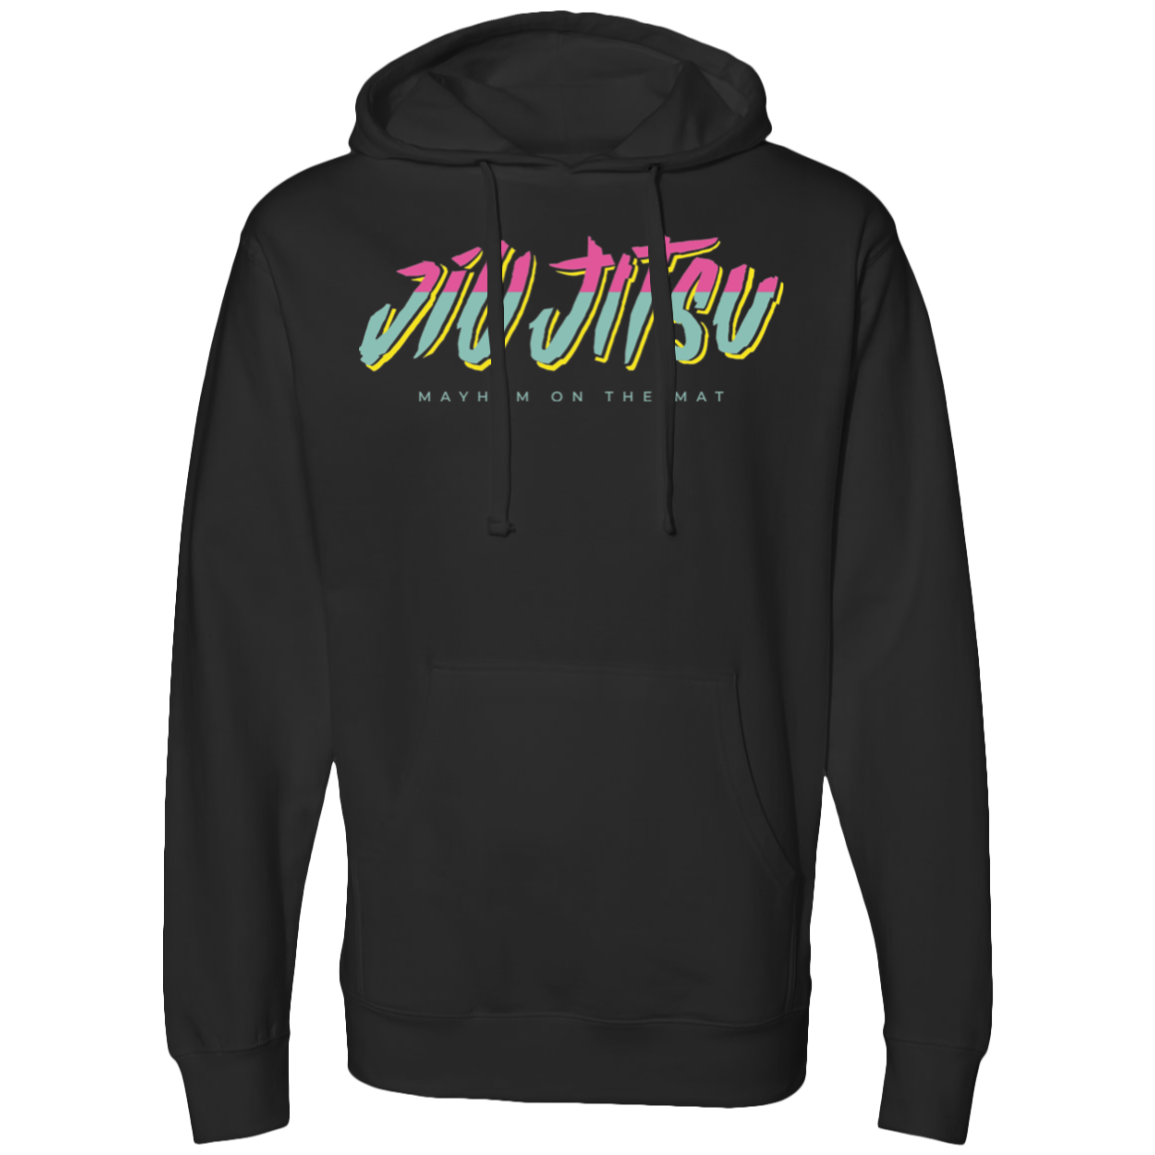 A City Connect - Black hoodie with a colorful sanctuary design on it.